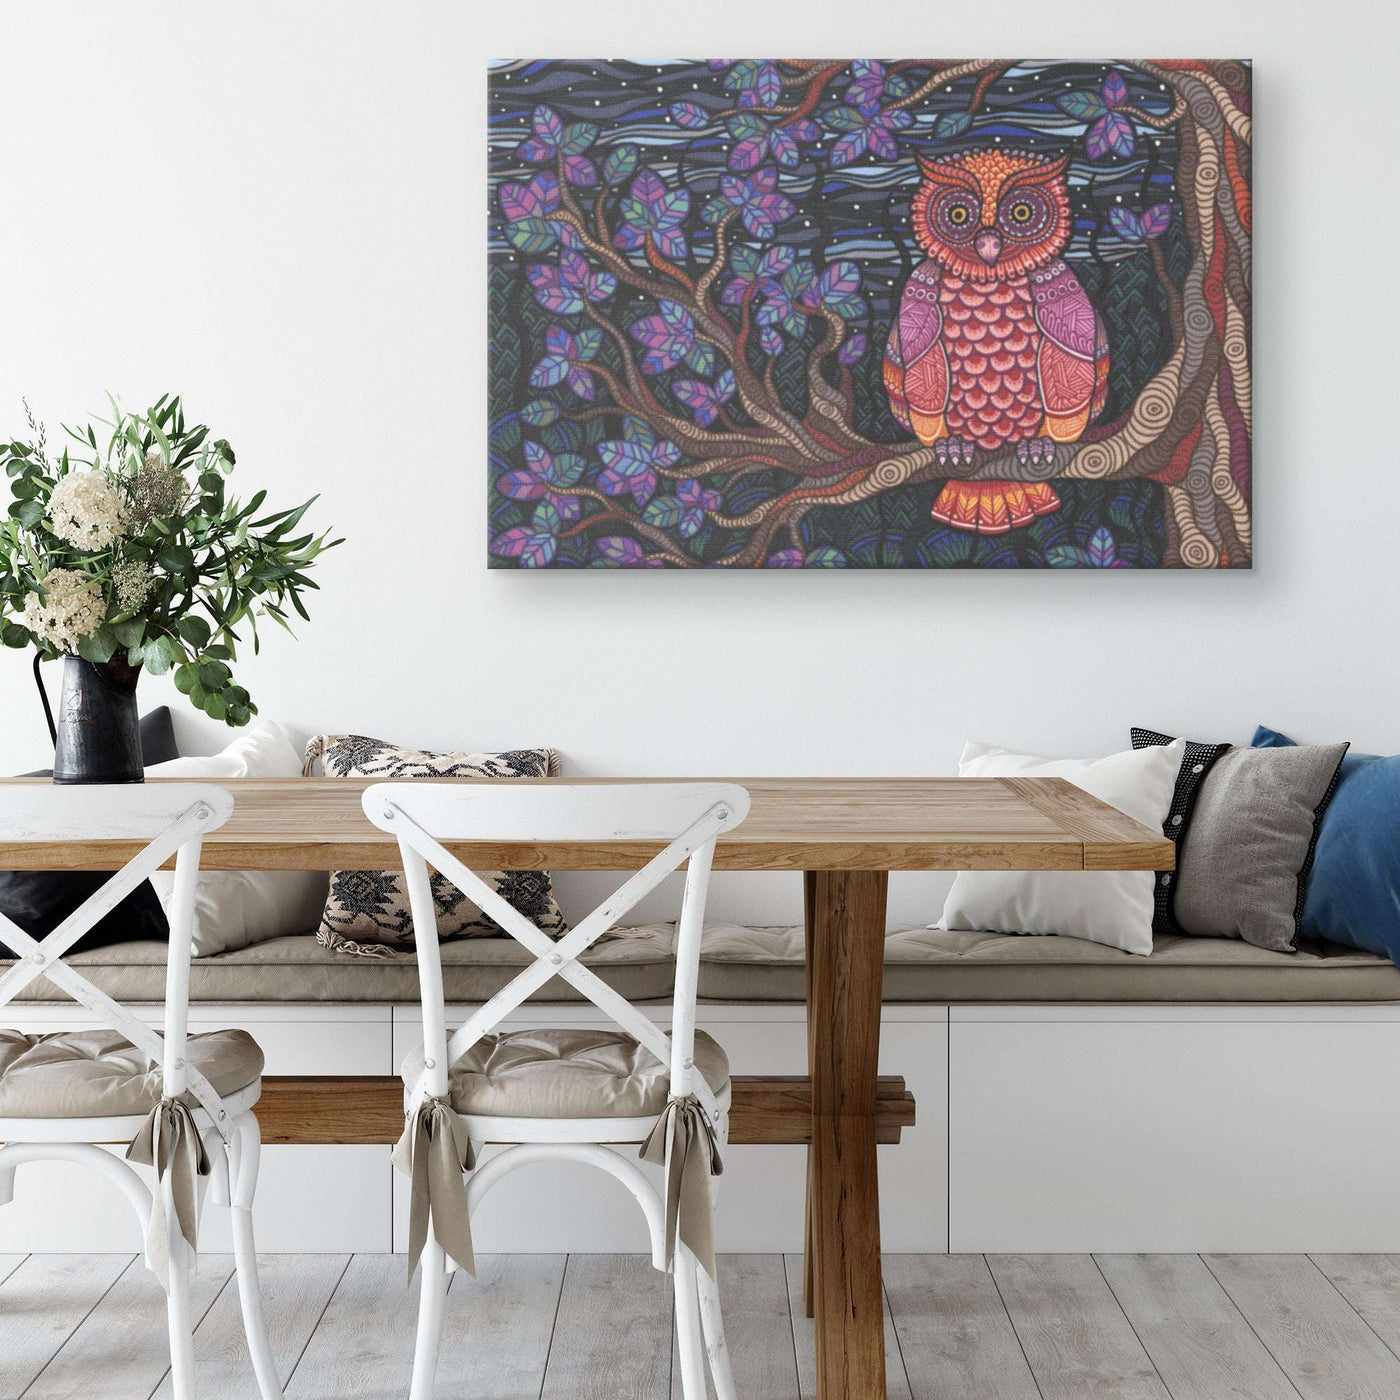 An Owl Tree Canvas Print hung above a dining table with white chairs and a vase of flowers, inside a neatly decorated room.